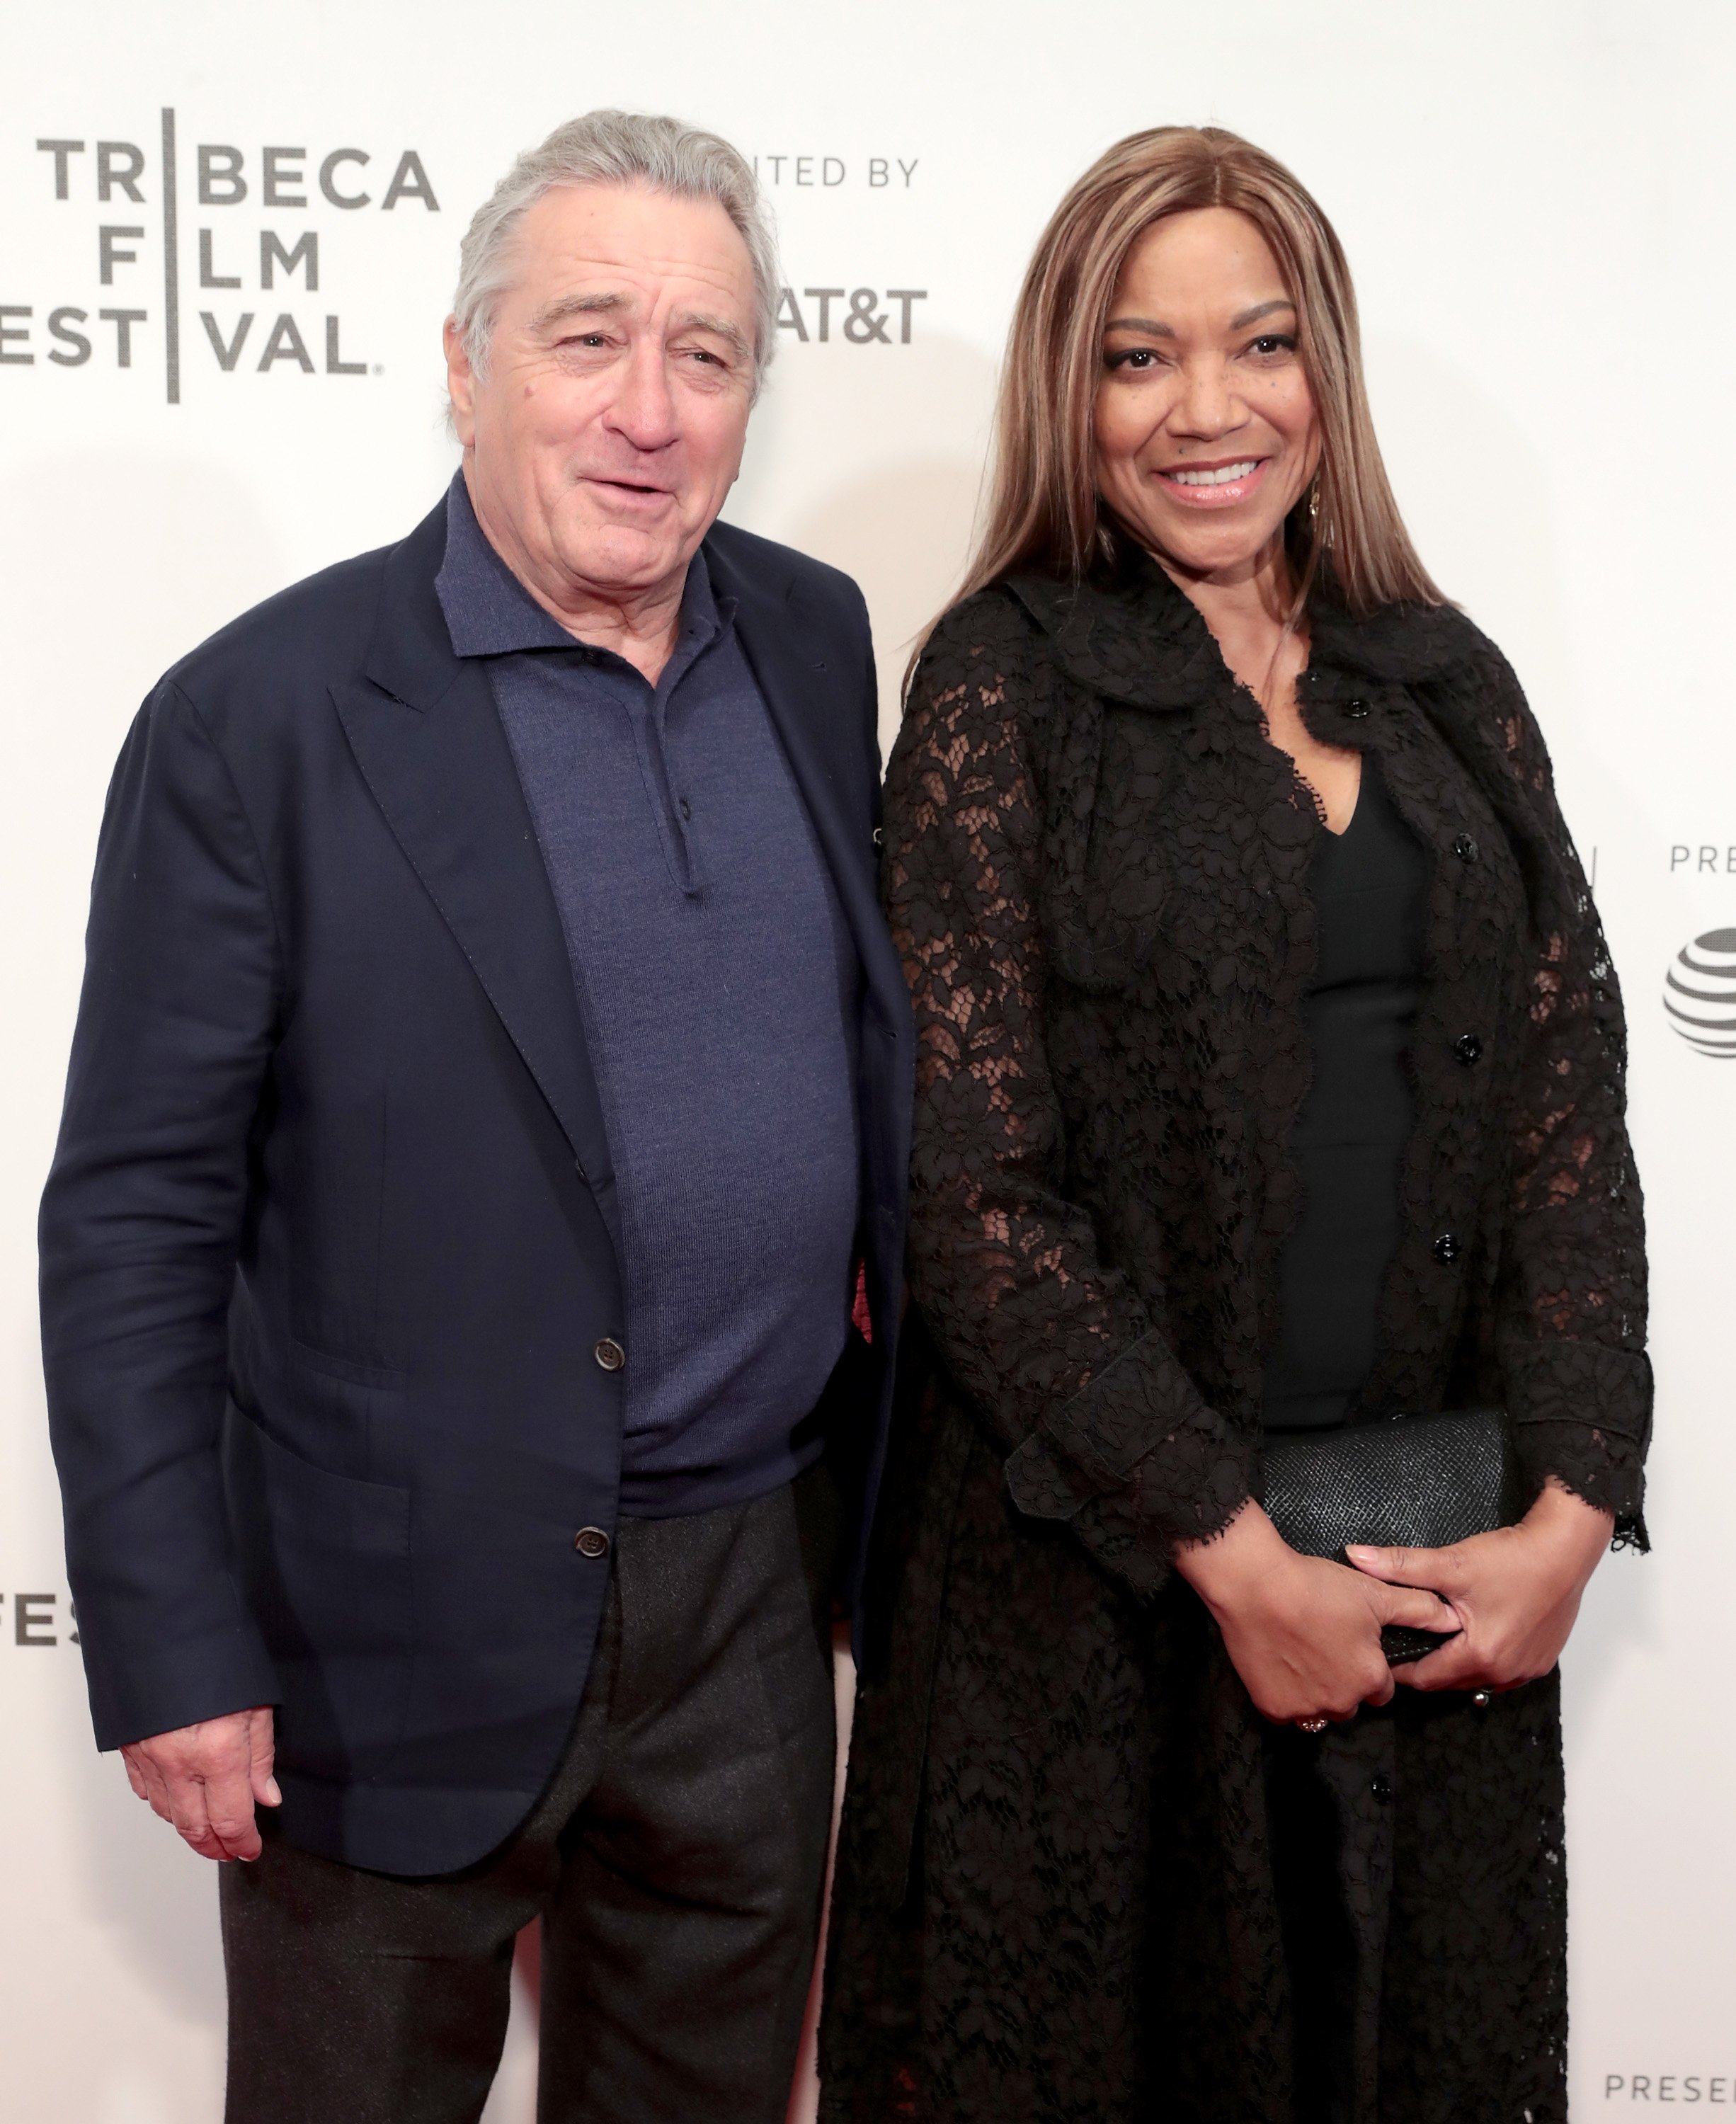 obert De Niro and Grace Hightower at the screening of 'The Fourth Estate' at the 2018 Tribeca Film Festival at BMCC Tribeca PAC on April 28, 2018 in New York City. | Photo: Getty 